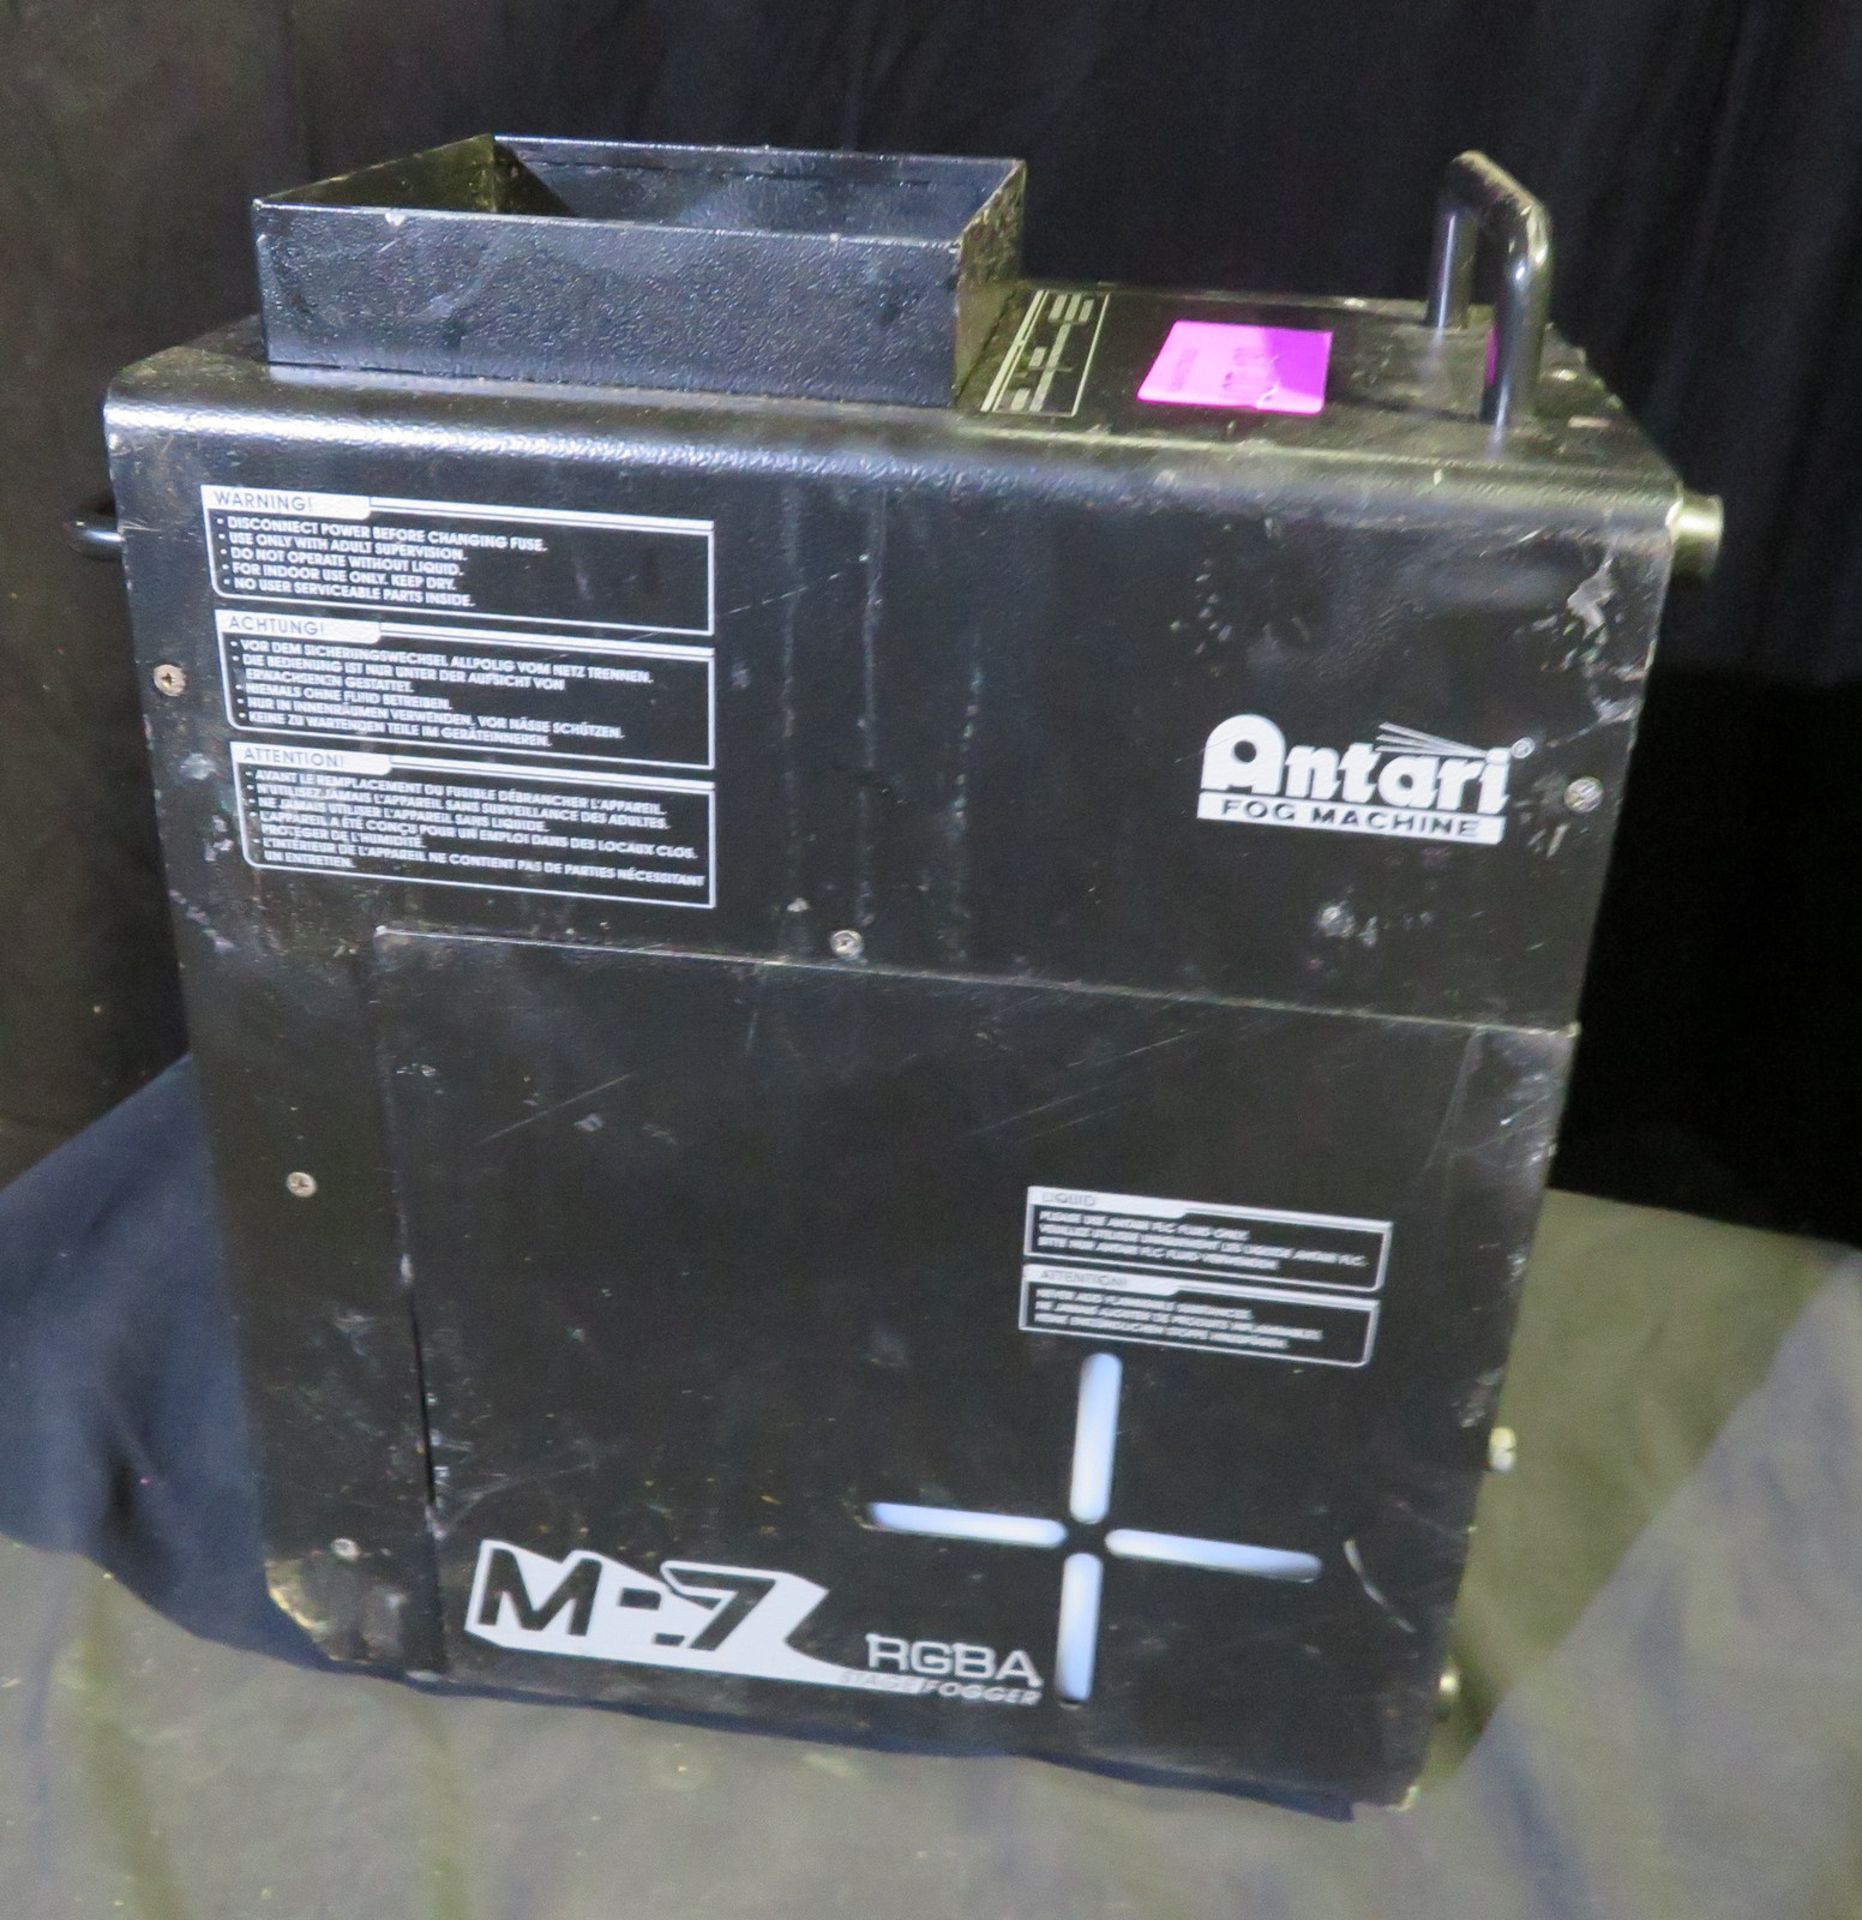 Antari M7 CO2 simulating vertical fog machine. Smoke machine working but fault with LED board - Image 4 of 6